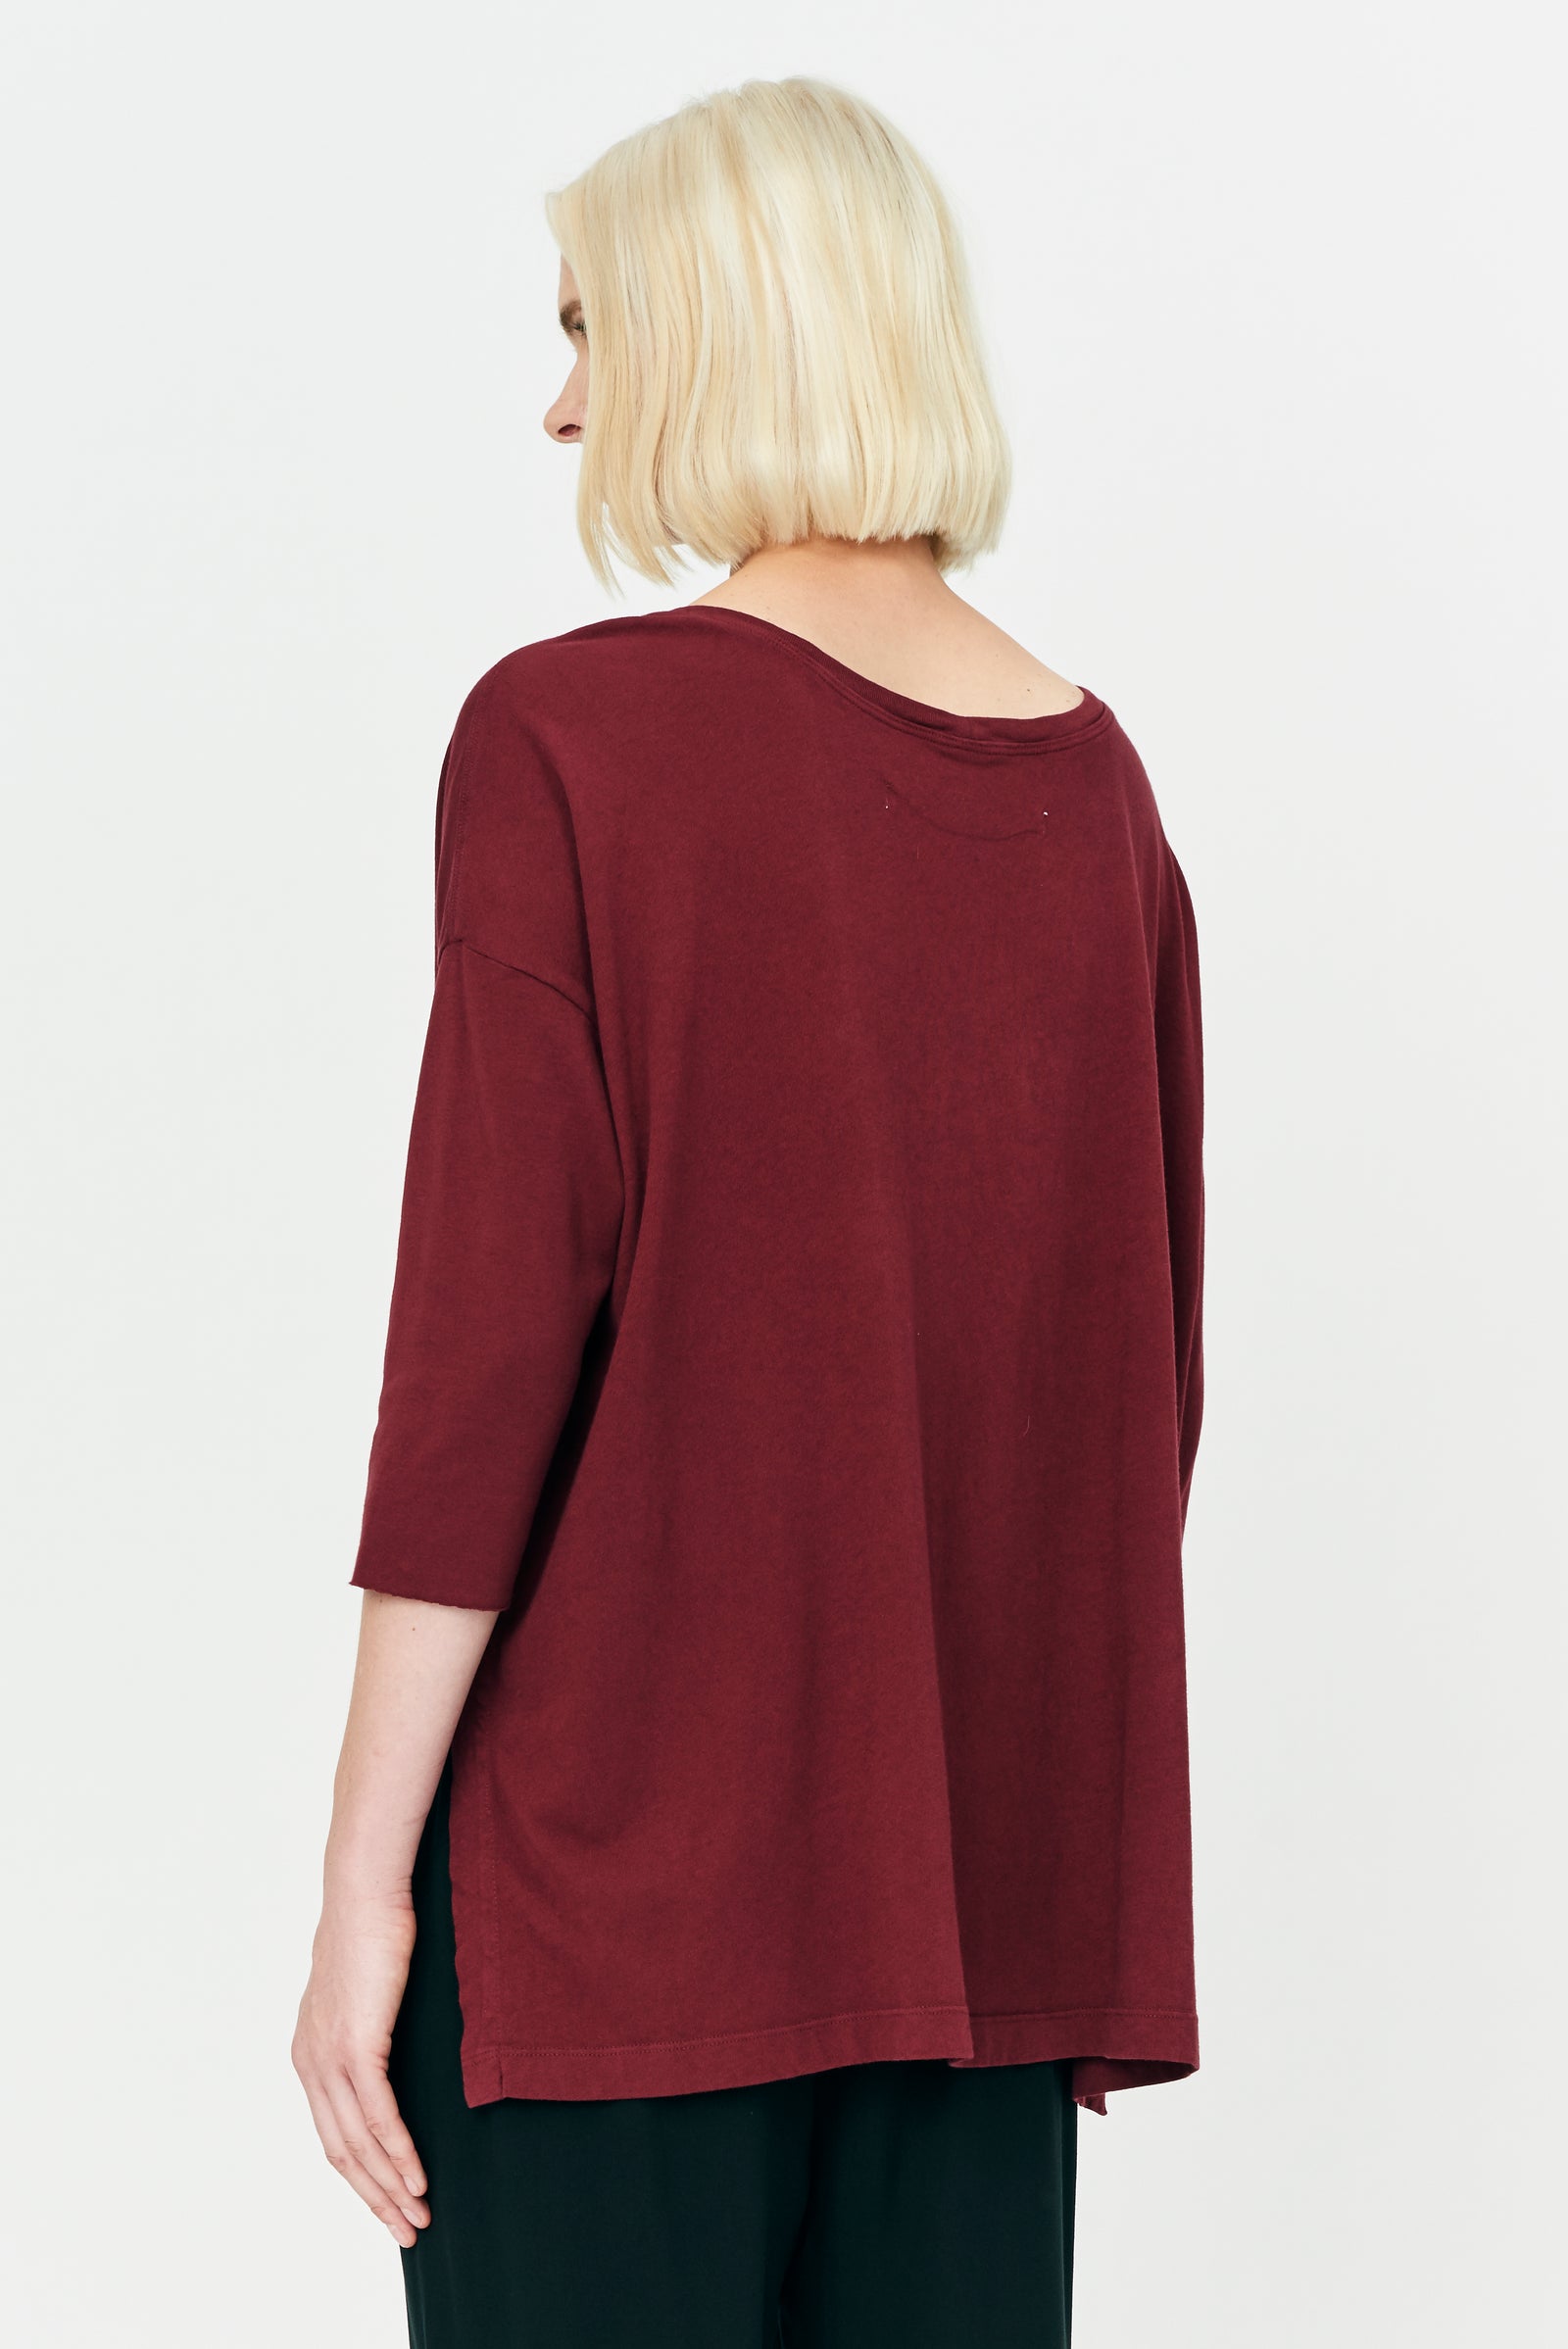 Sienna Classic Jersey Cocoon Shirt Back Close-Up View